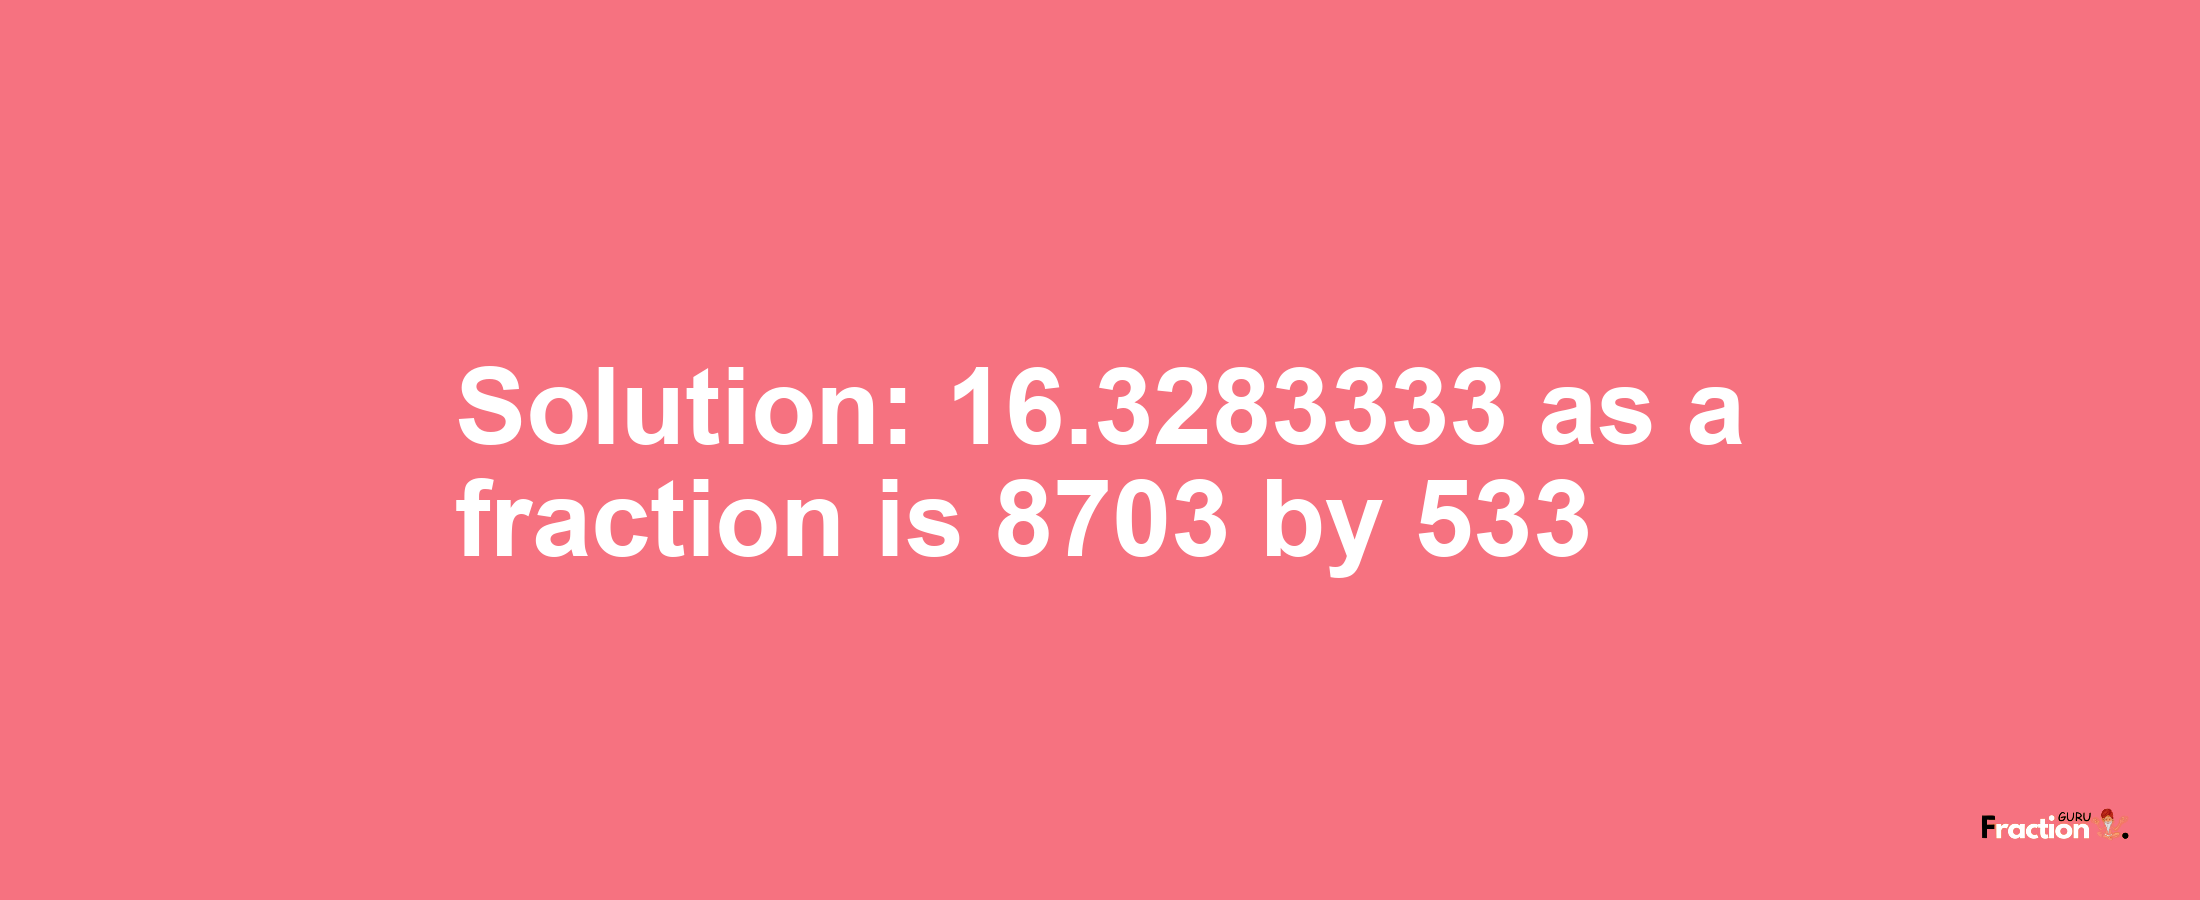 Solution:16.3283333 as a fraction is 8703/533